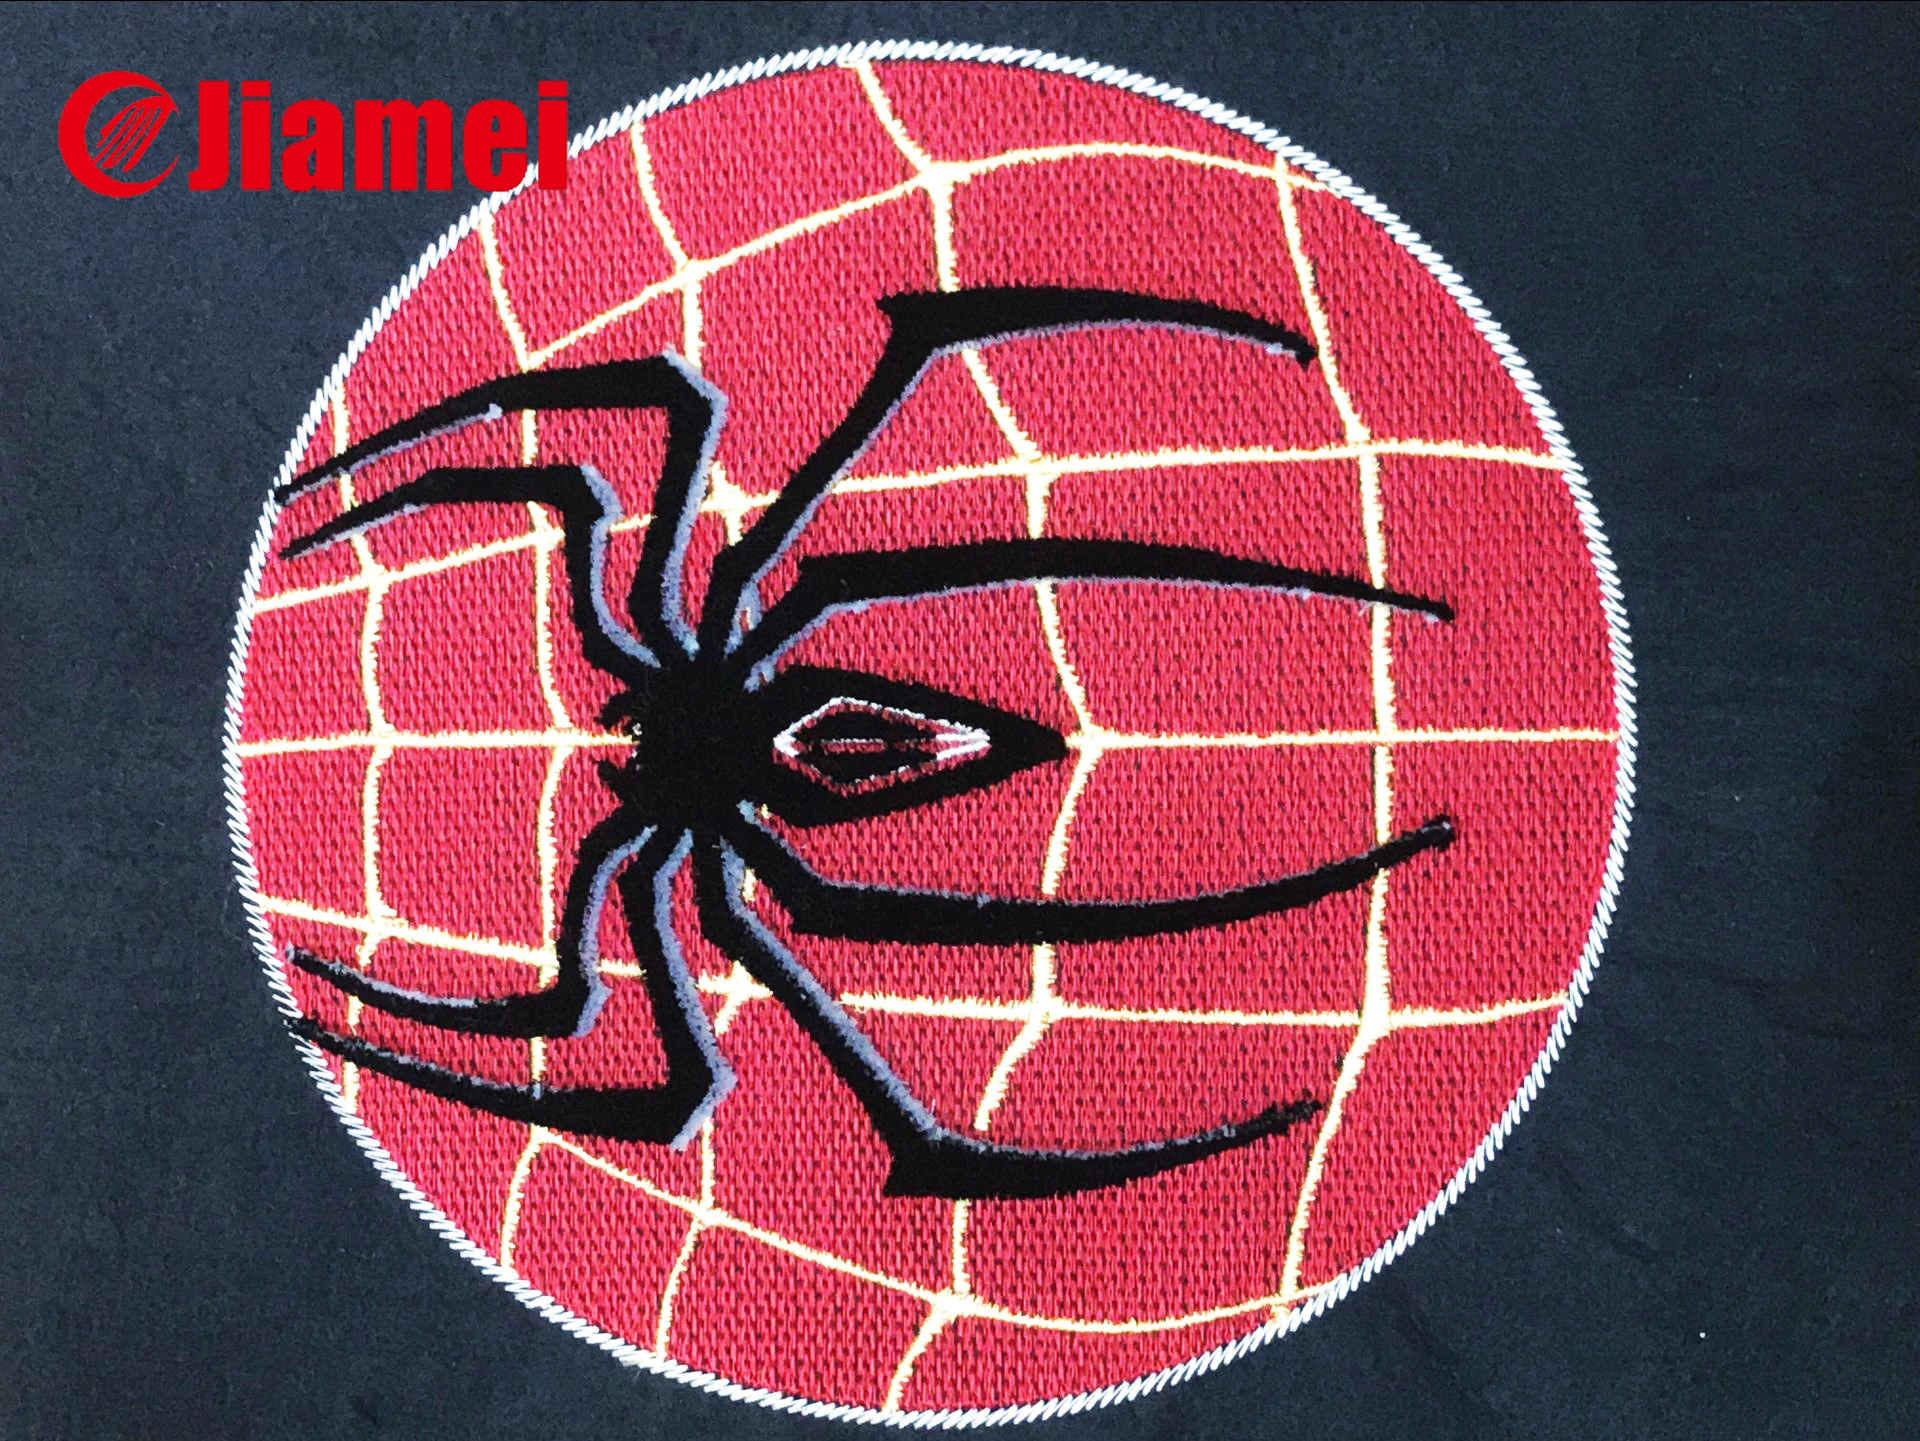 Spider-man Round Logo Costume Patch 2 7/8 inches tall 